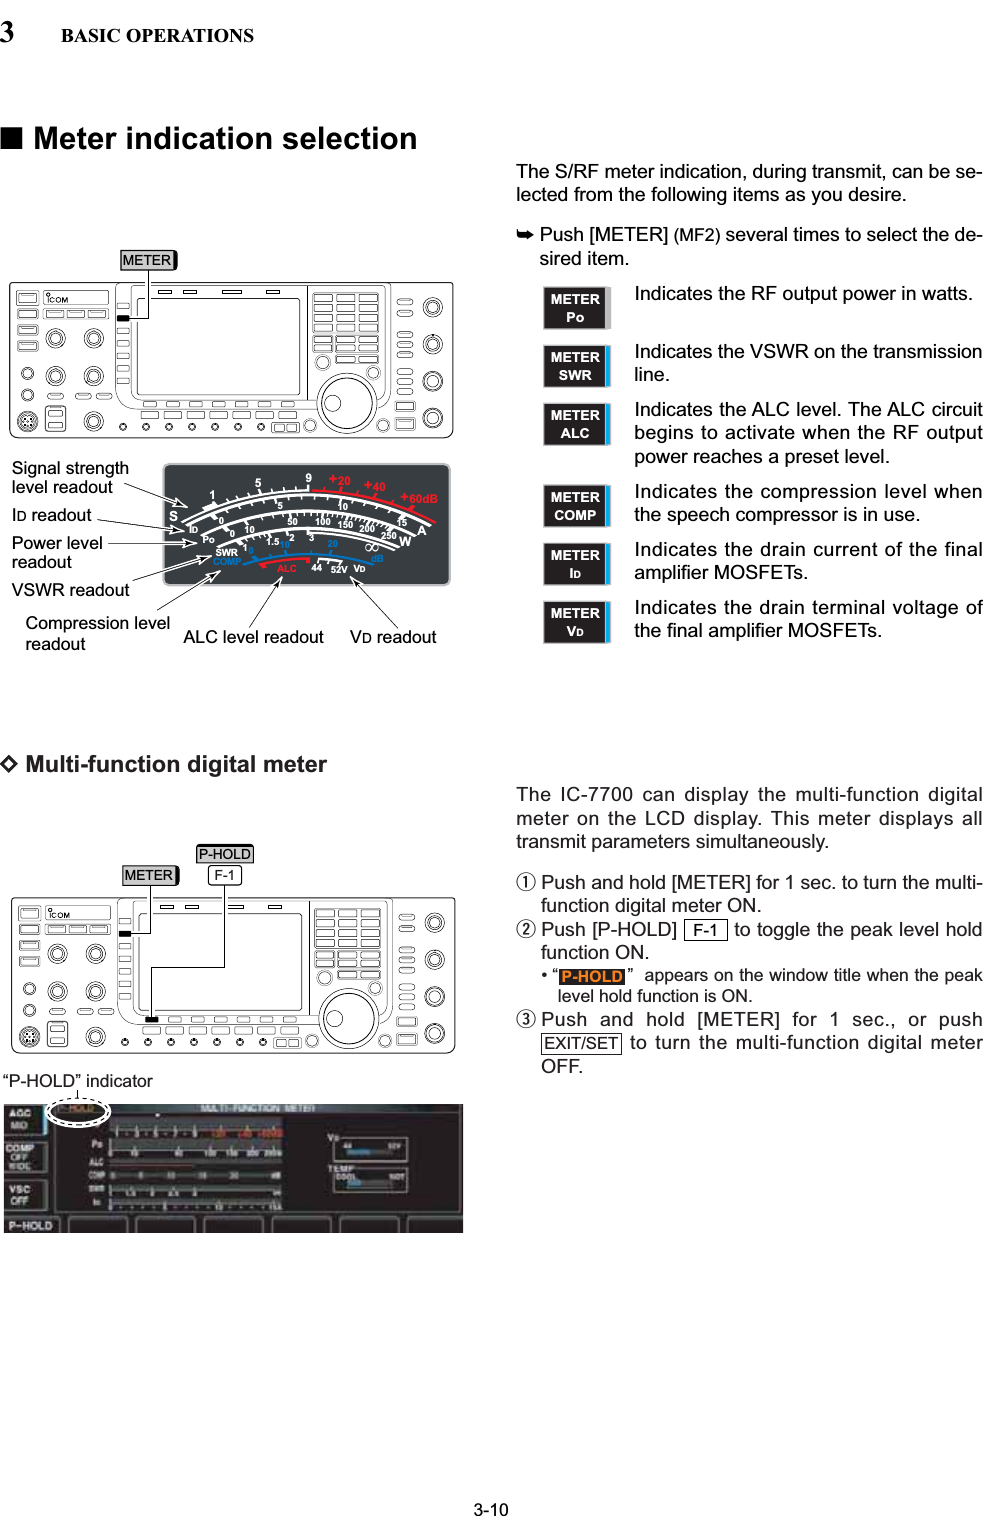 DMulti-function digital meterThe IC-7700 can display the multi-function digitalmeter on the LCD display. This meter displays alltransmit parameters simultaneously.qPush and hold [METER] for 1 sec. to turn the multi-function digital meter ON.wPush [P-HOLD]  to toggle the peak level holdfunction ON.• “ ”  appears on the window title when the peaklevel hold function is ON.ePush and hold [METER] for 1 sec., or pushto turn the multi-function digital meterOFF.EXIT/SETP-HOLDF-1■Meter indication selectionThe S/RF meter indication, during transmit, can be se-lected from the following items as you desire.➥Push [METER] (MF2) several times to select the de-sired item.Indicates the RF output power in watts.Indicates the VSWR on the transmissionline.Indicates the ALC level. The ALC circuitbegins to activate when the RF outputpower reaches a preset level.Indicates the compression level whenthe speech compressor is in use.Indicates the drain current of the finalamplifier MOSFETs.Indicates the drain terminal voltage ofthe final amplifier MOSFETs.METERVDMETERIDMETERCOMPMETERALCMETERSWRMETERPo3-103BASIC OPERATIONS“P-HOLD” indicatorMETERMETER F-1P-HOLDS1000125101010 2044 52V50 100 150 200 2501531.5IDVDdBWAPoSWRCOMP ALC59+20 +40 +60dB&apos;Signal strengthlevel readoutID readoutPower level readoutVSWR readoutCompression levelreadout ALC level readout VD readout